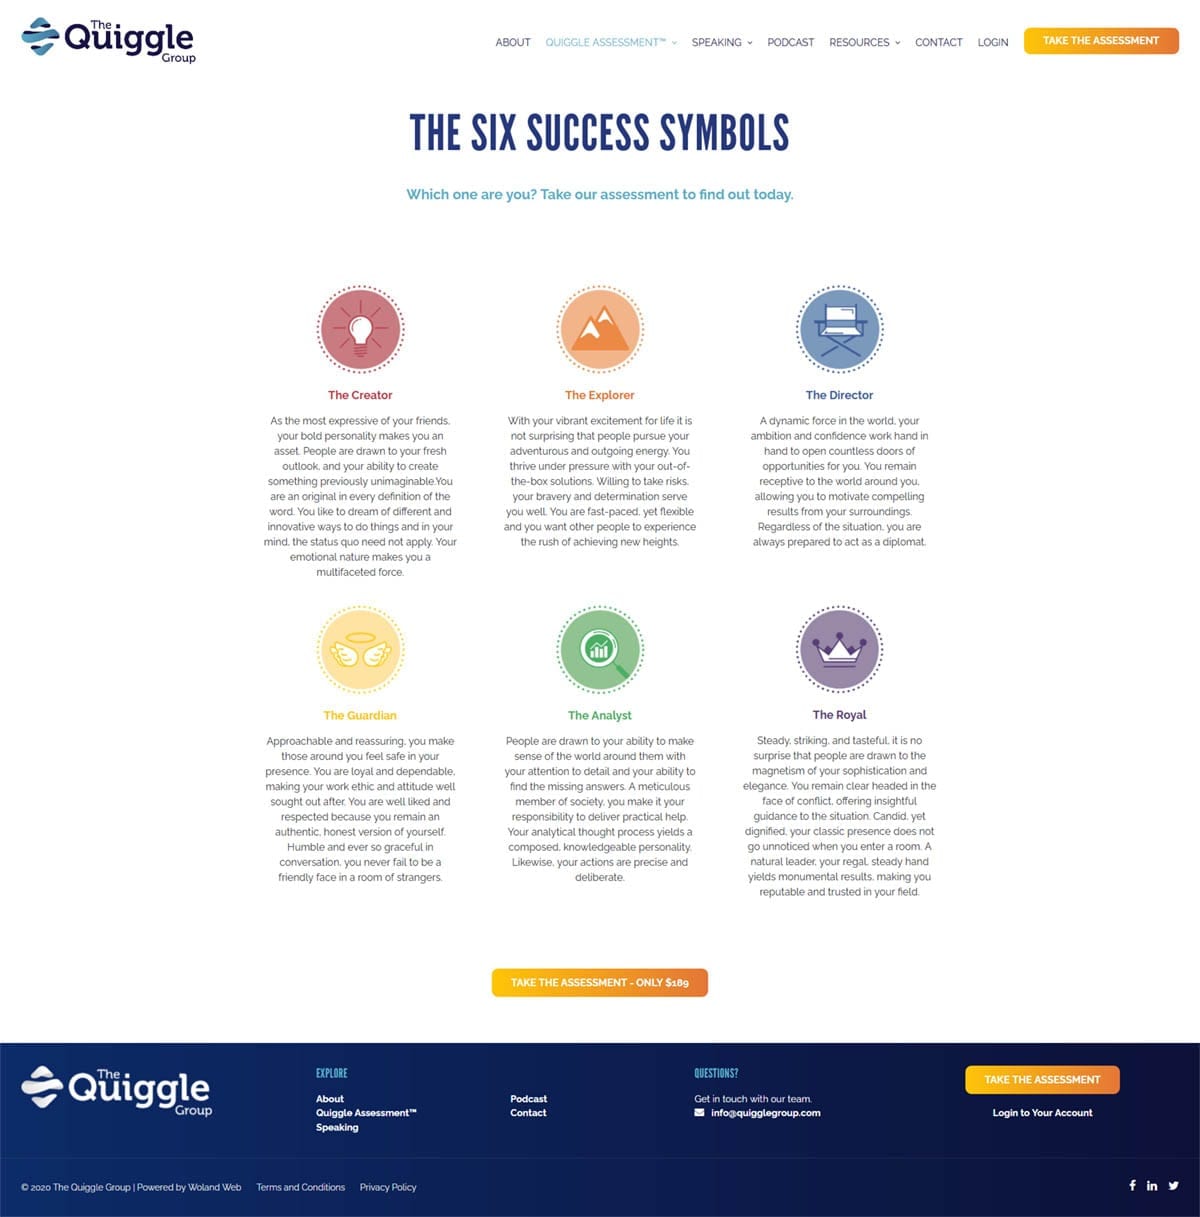 The Quiggle Group website success symbols page screenshot